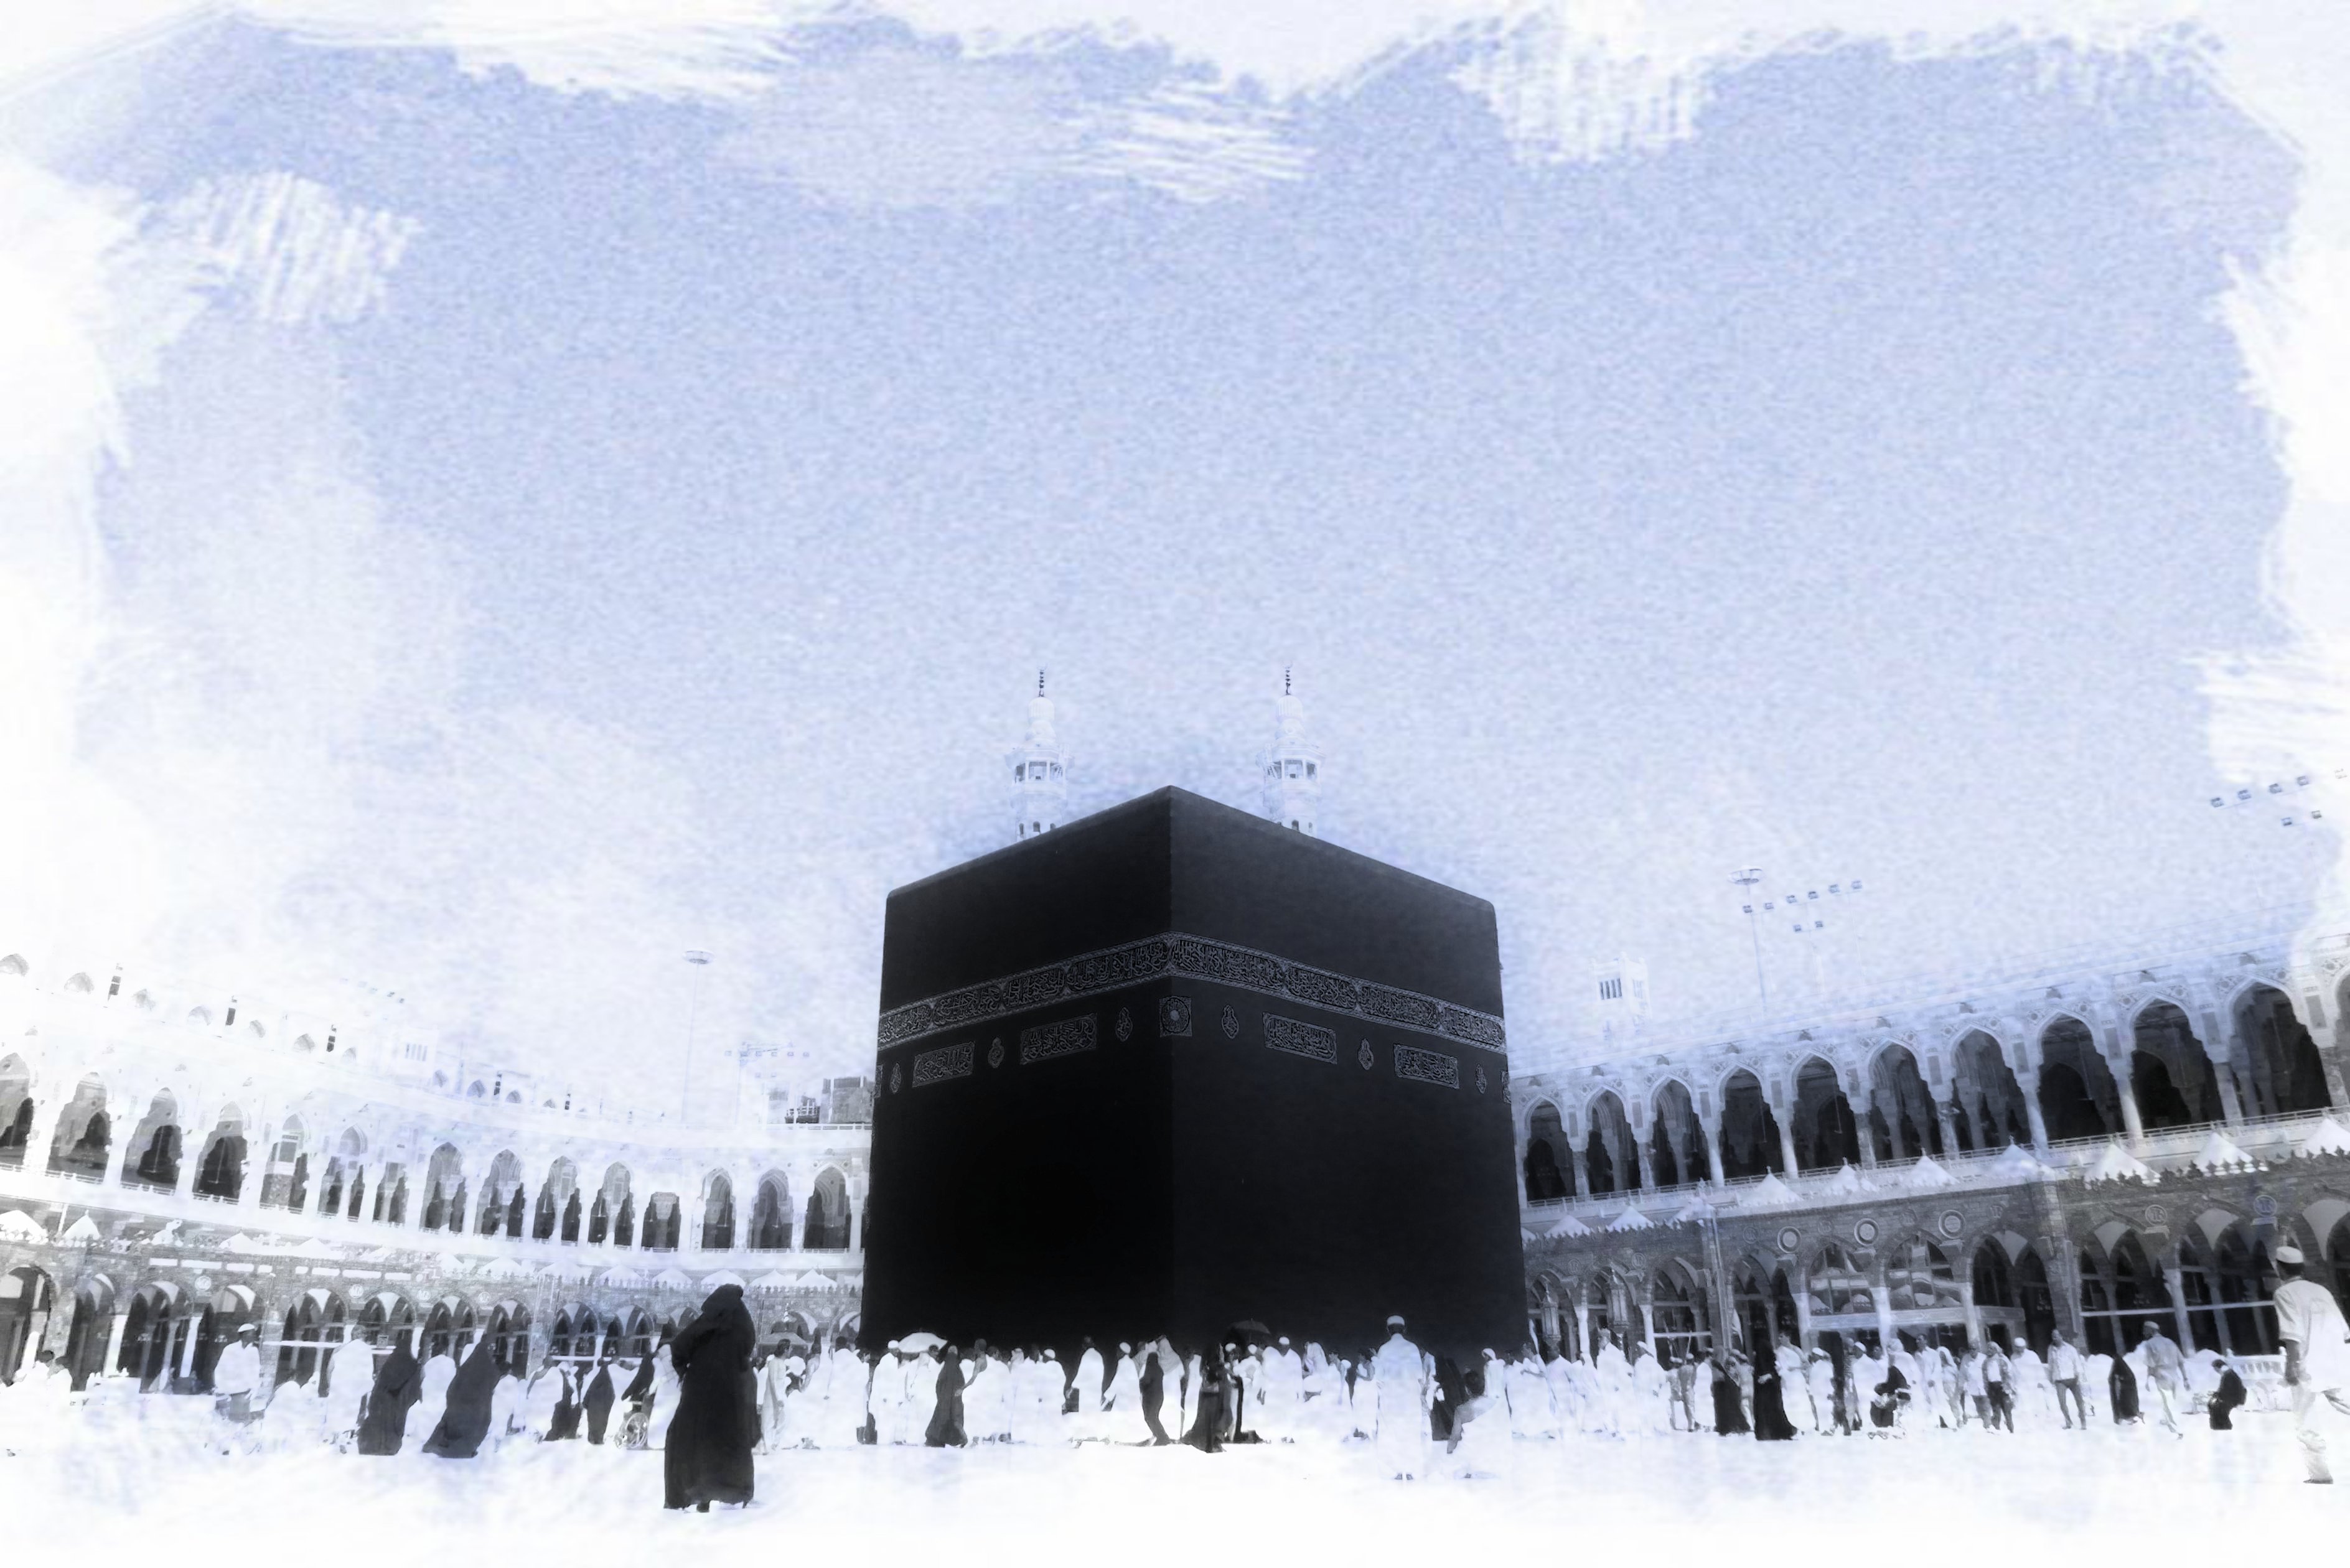 Kaaba Mecca Wallpaper - Plane And Birds Can Not Flew - 3776x2520 Wallpaper  